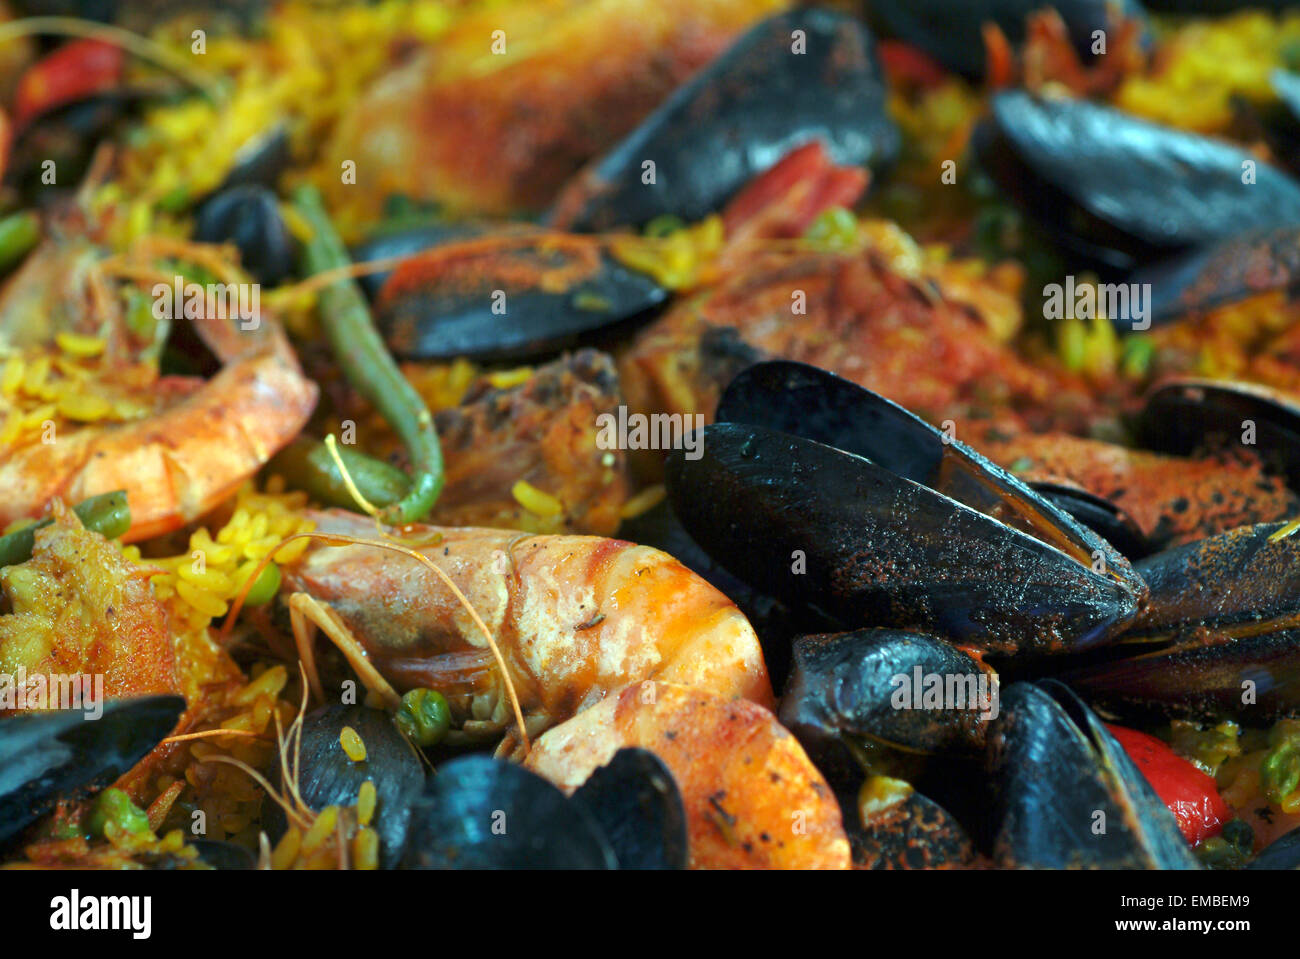 Ready cooked meal of mussels and shrimps on a market stand in Provence France Stock Photo